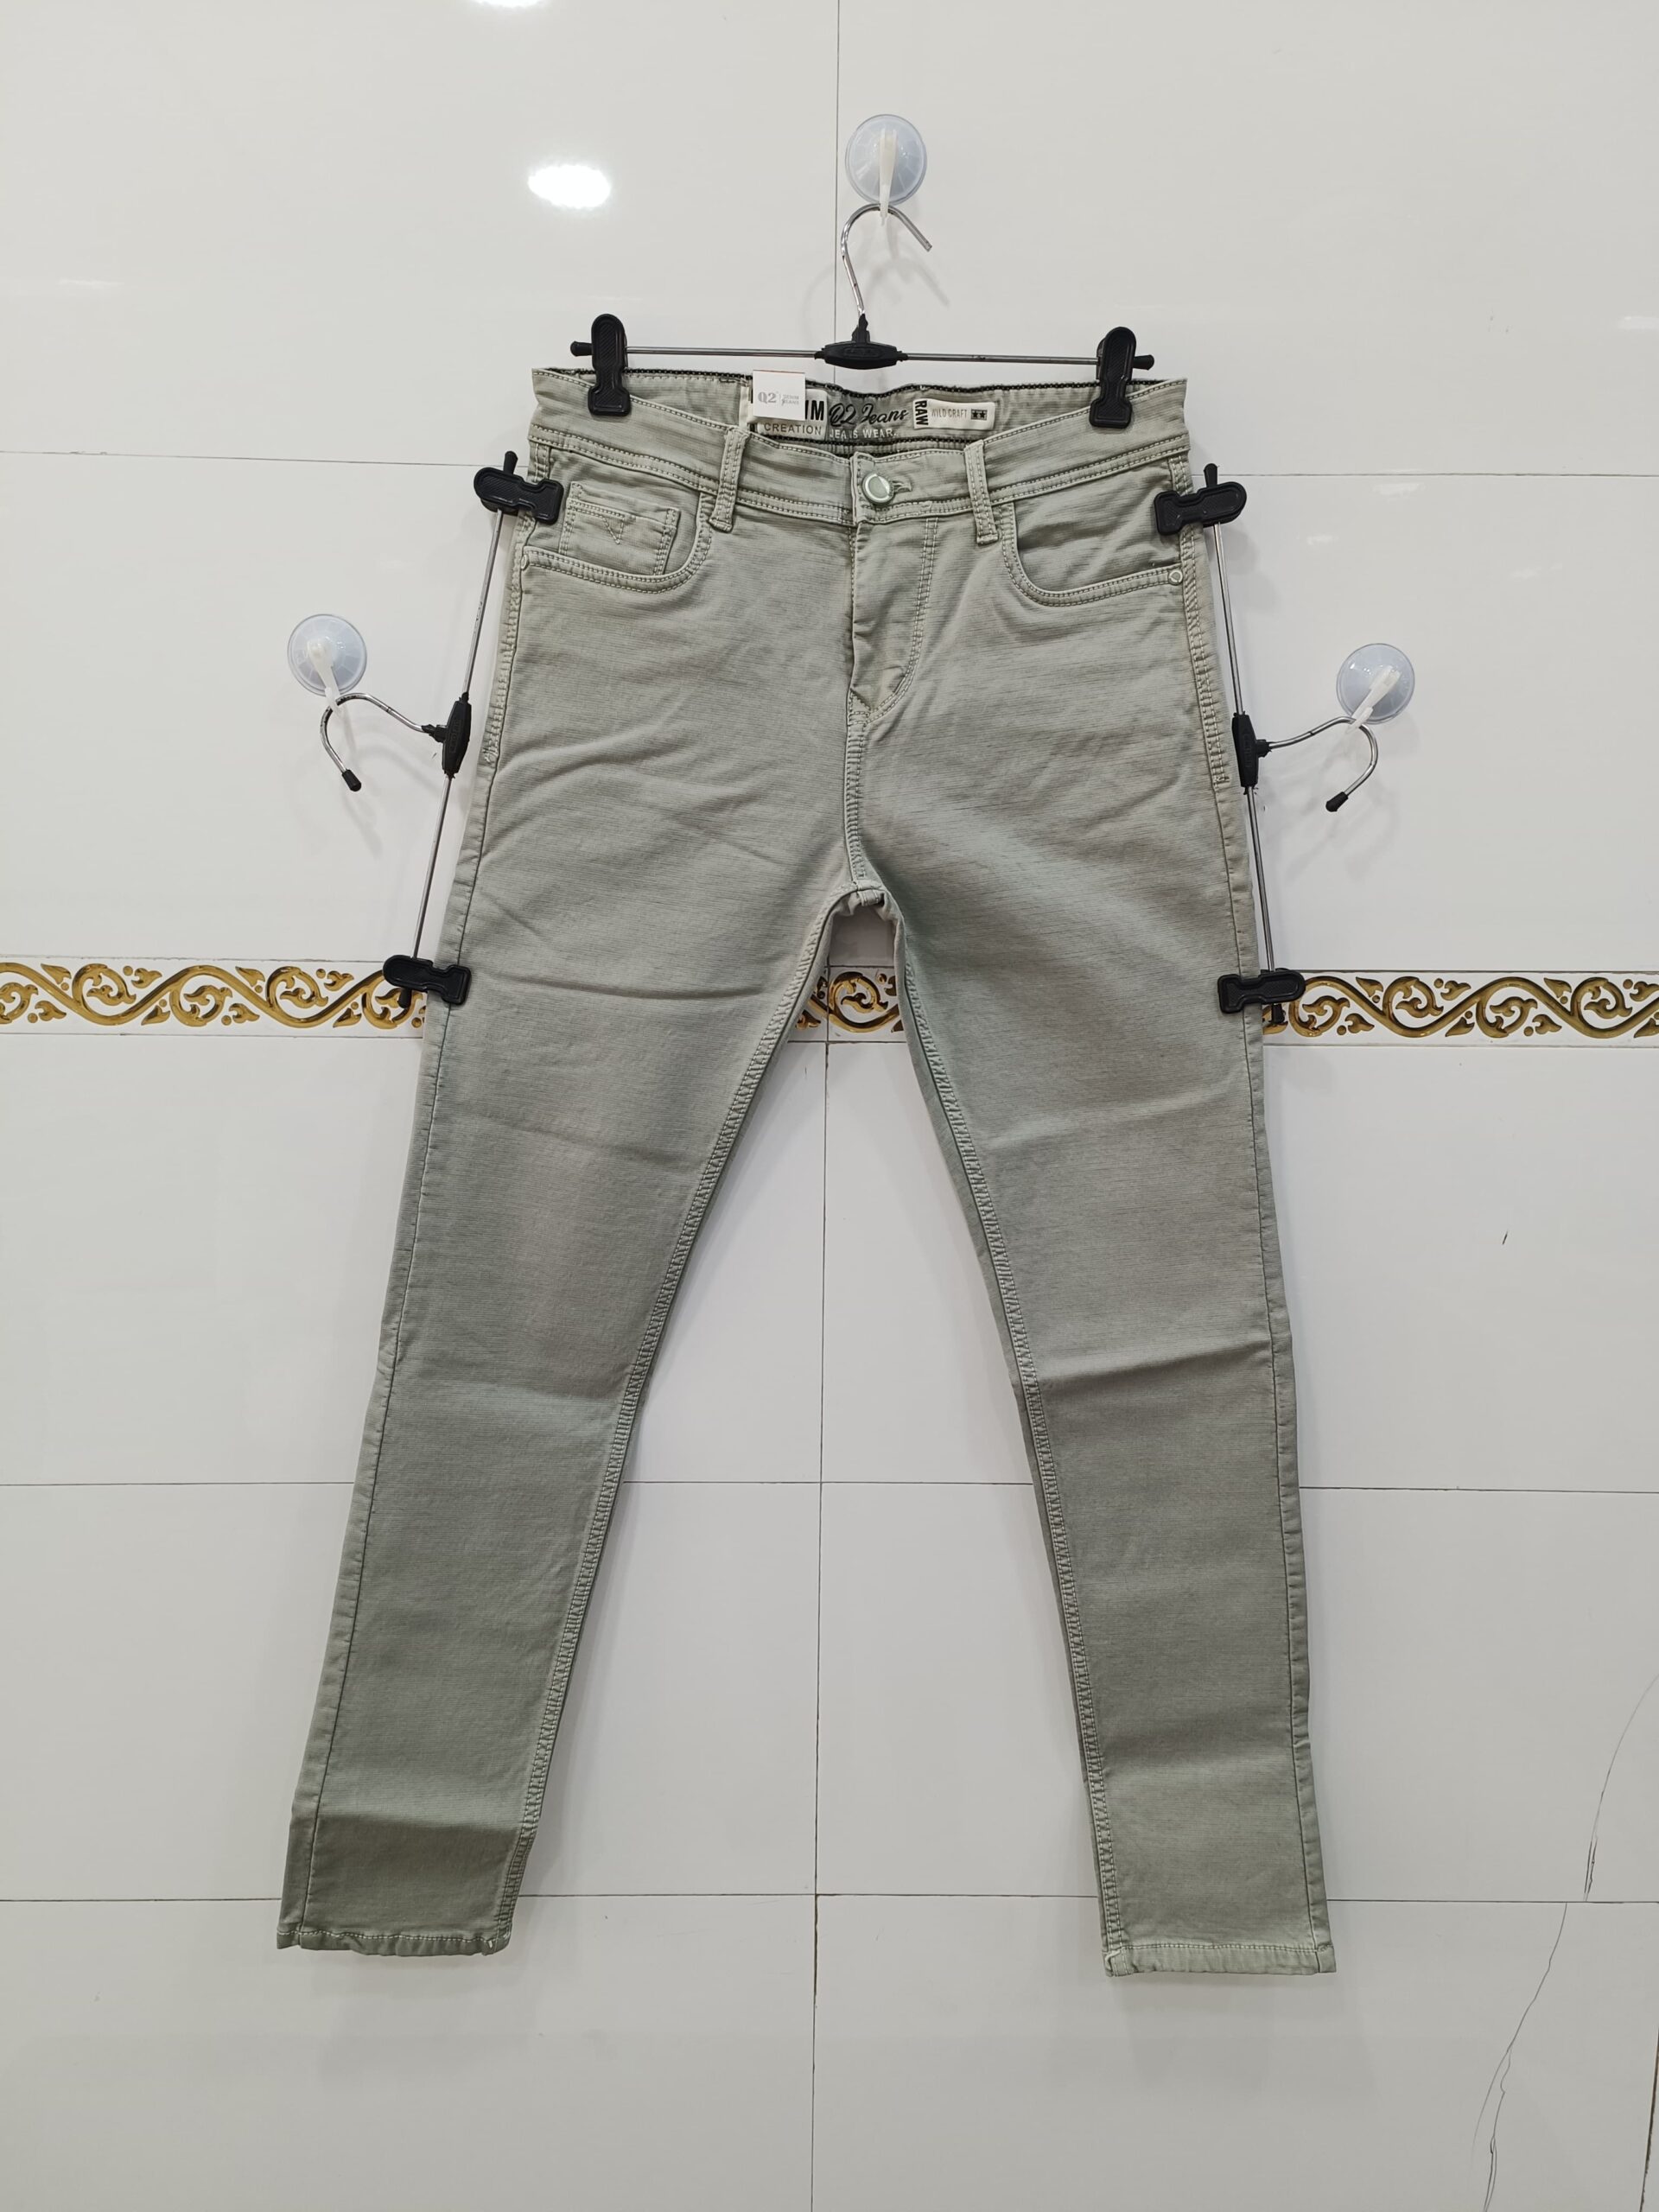 High Quality Mens Summer Loose Jeans For Men: Loose Fit, Solid Color,  Straight Ankle Length Pants In Cotton From Newfashionclothes, $22.83 |  DHgate.Com